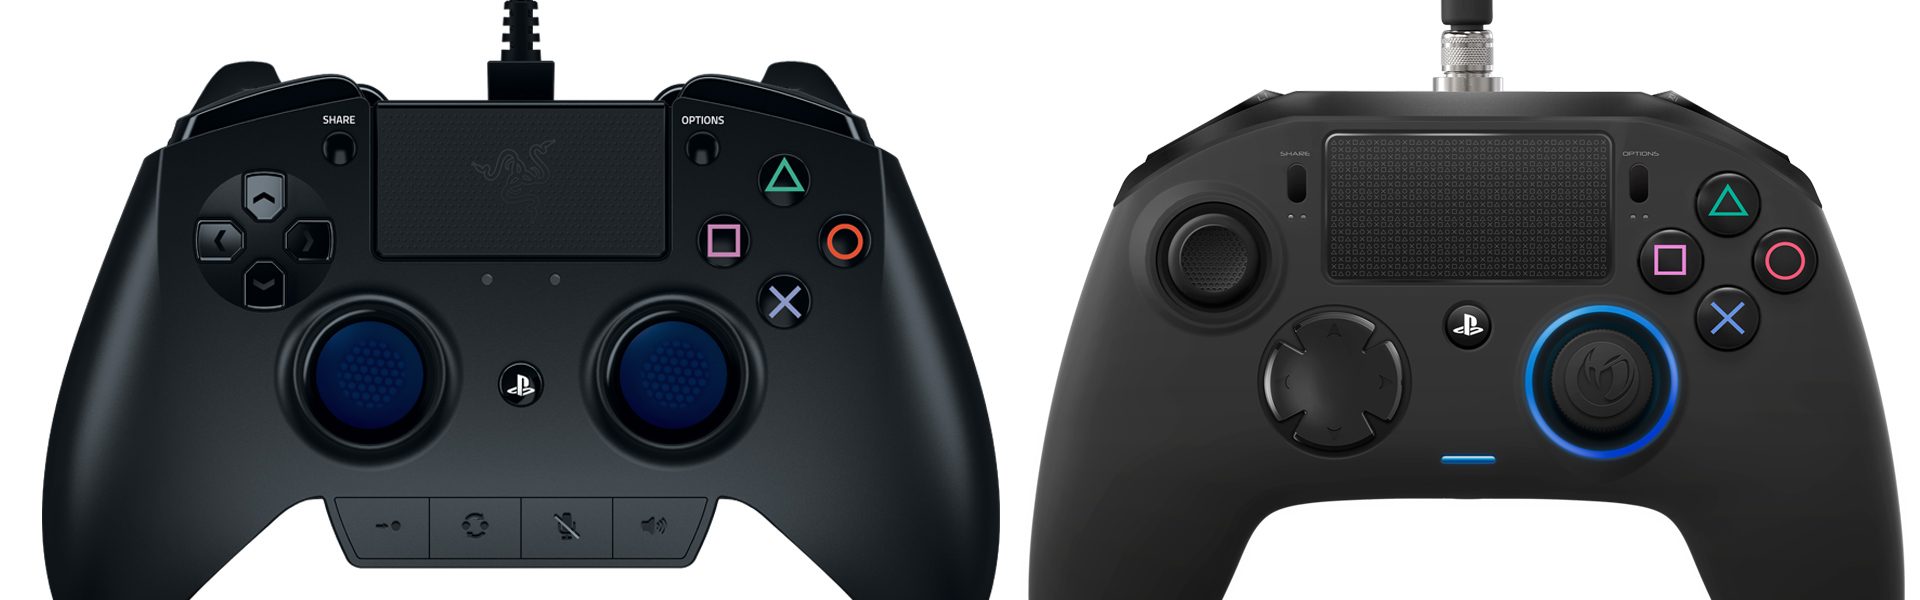 how to set up new controller on ps4